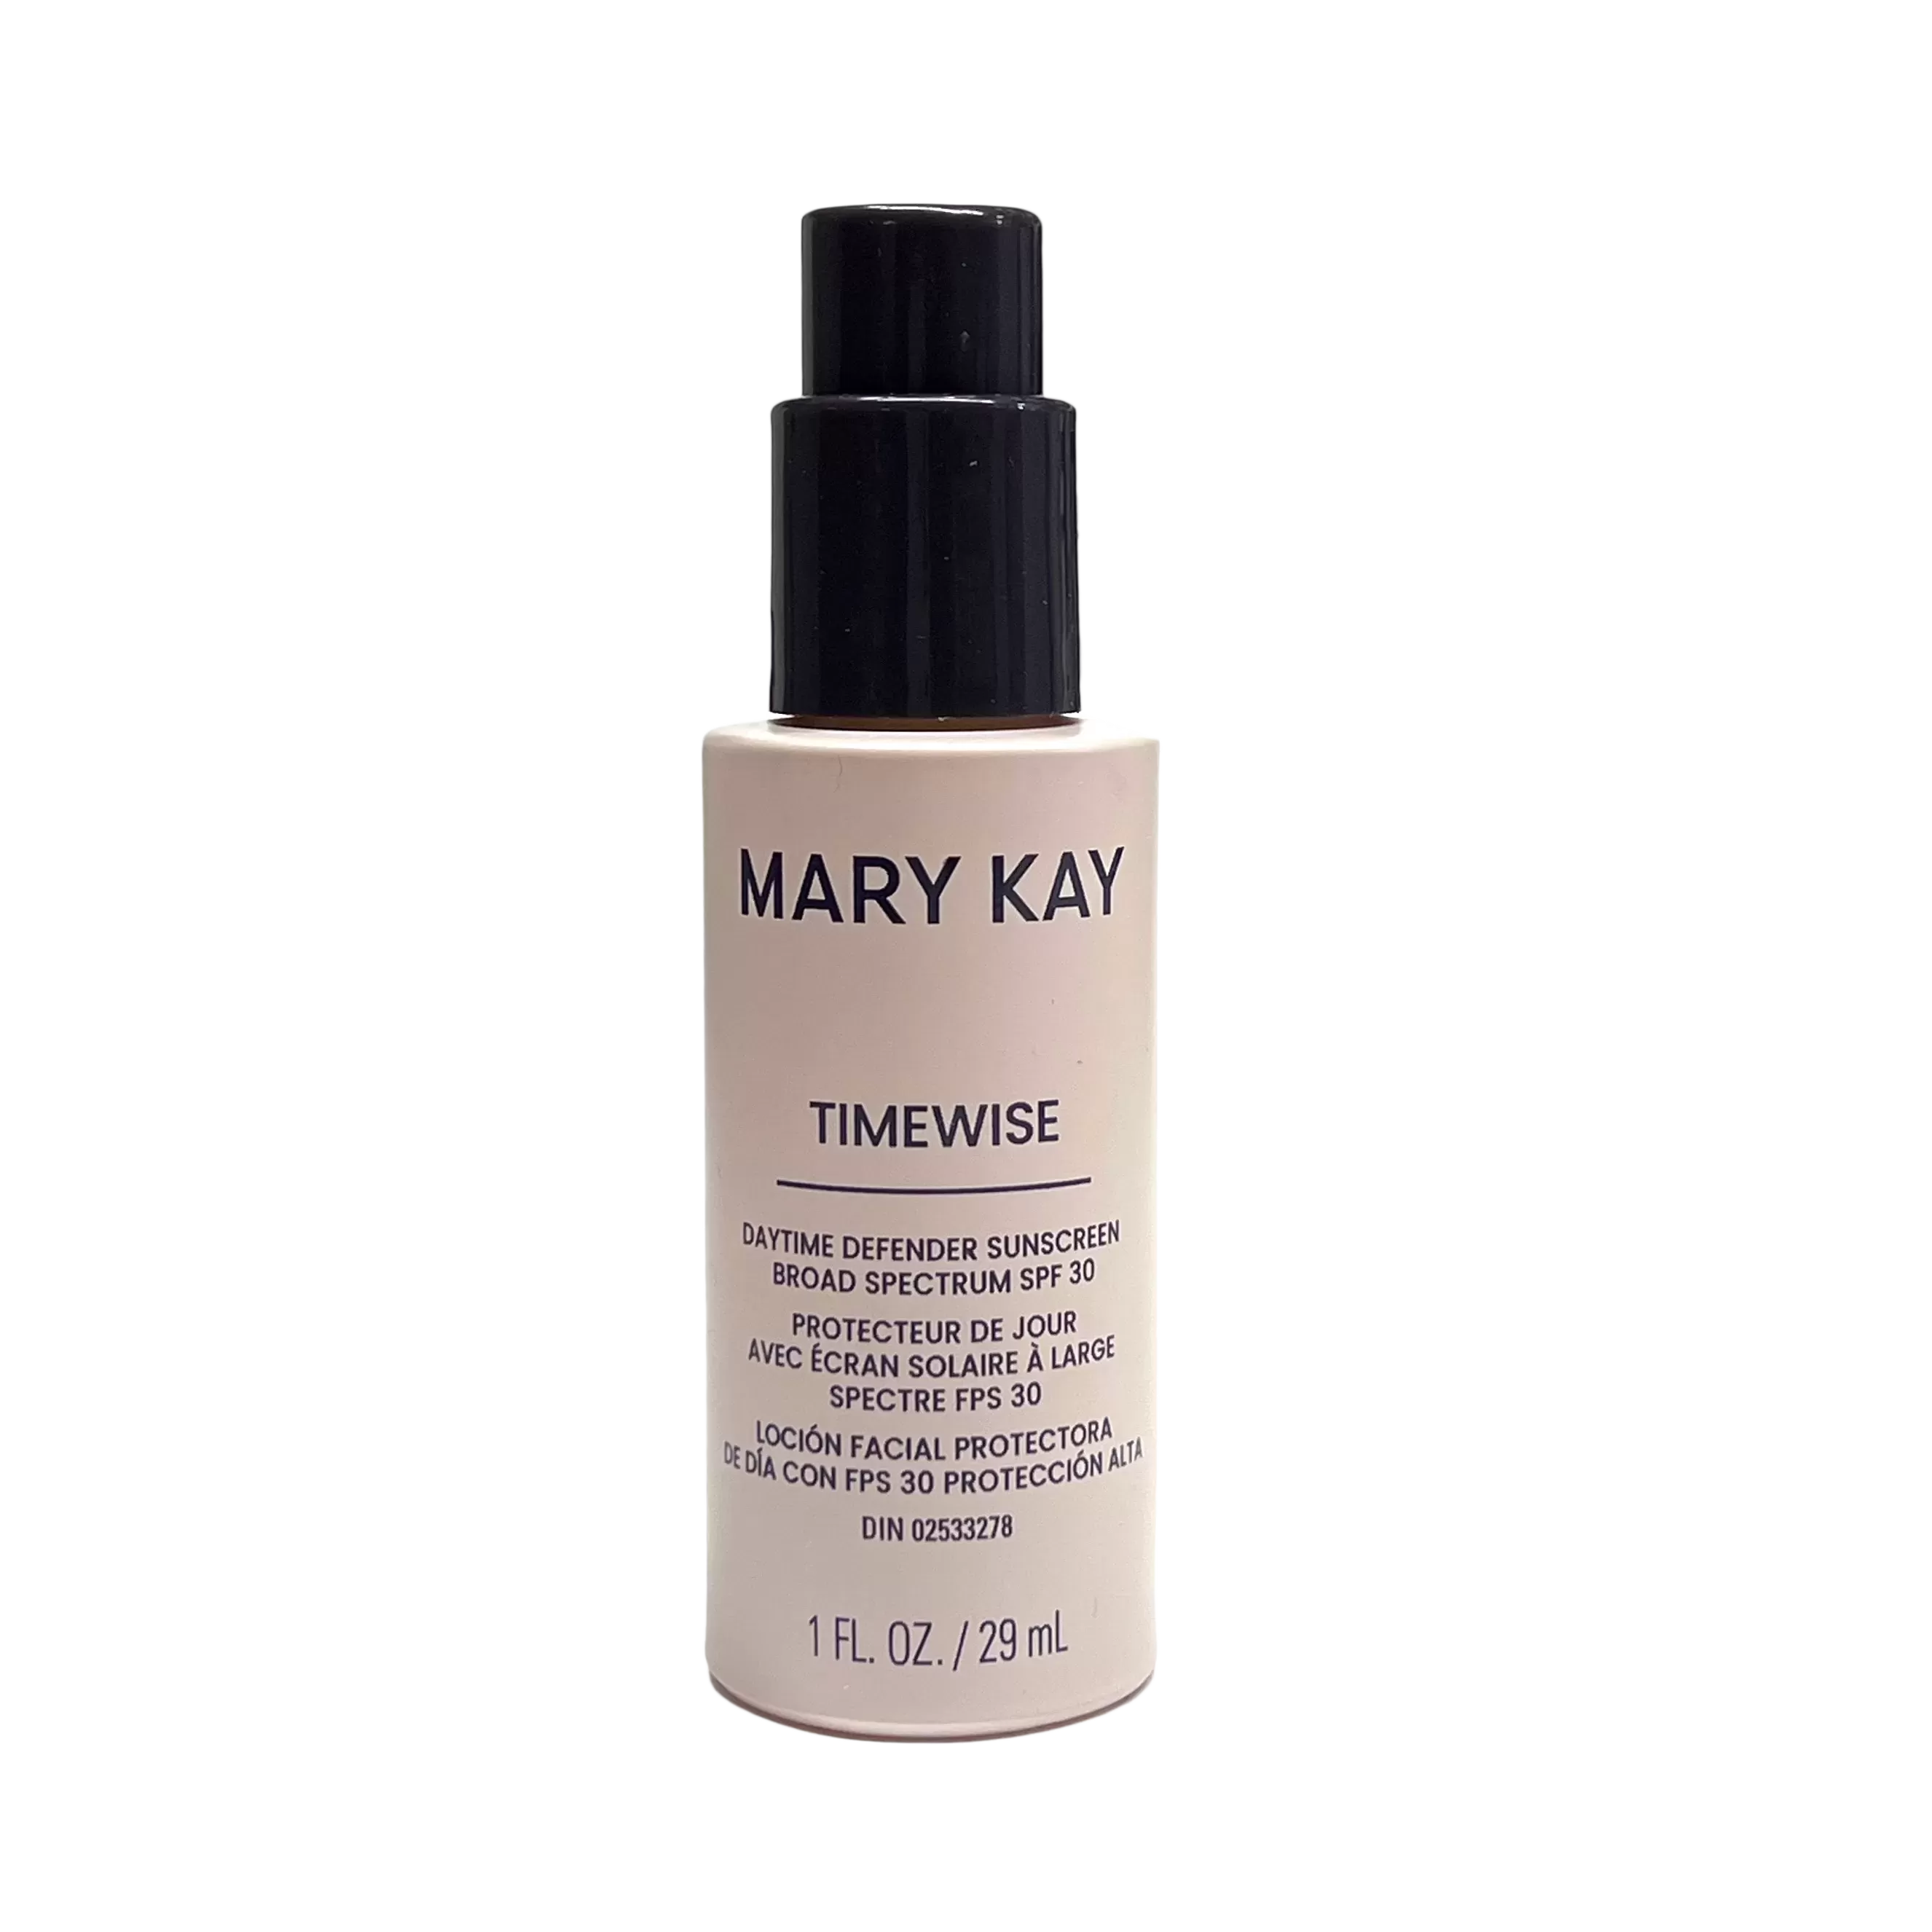 Face Moisturizer MARY KAY  TIMEWISE Daytime Defender Sunscreen SPF30